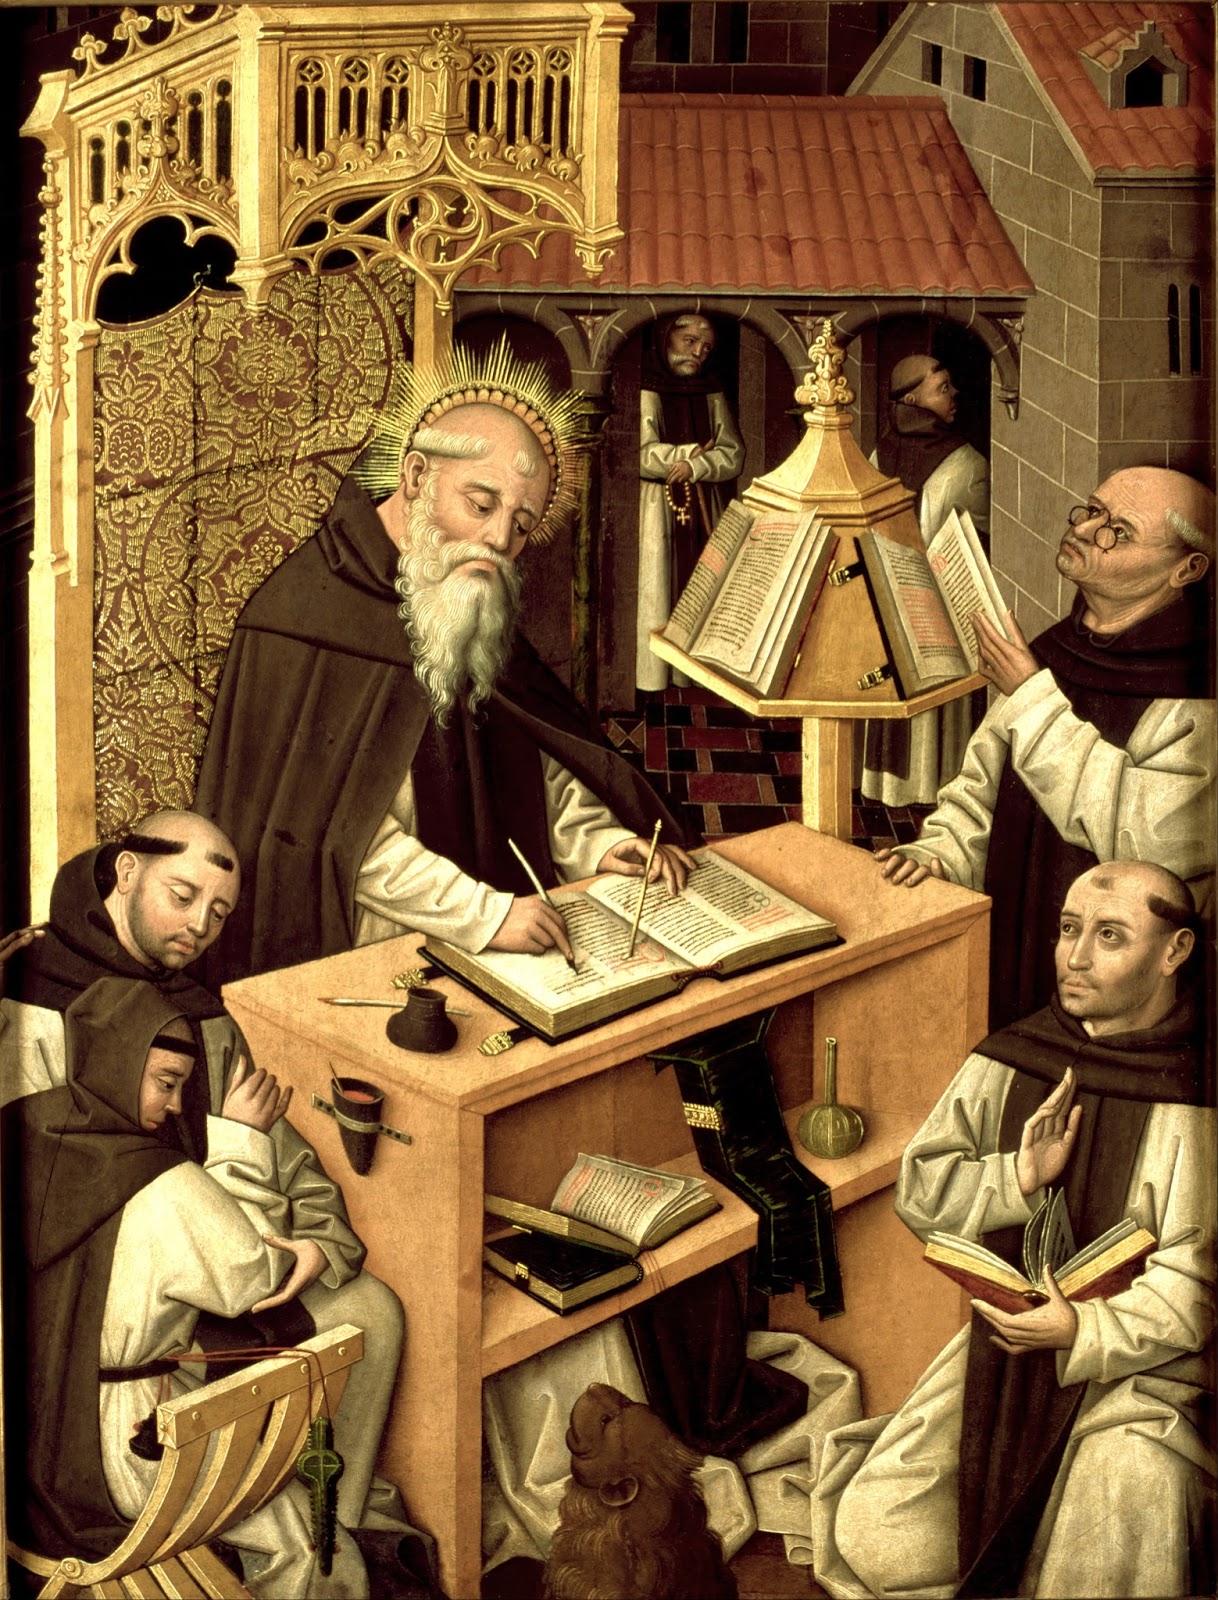 Master_of_Parral_-_St_Jerome_in_the_scriptorium_-_Google_Art_Project.jpg